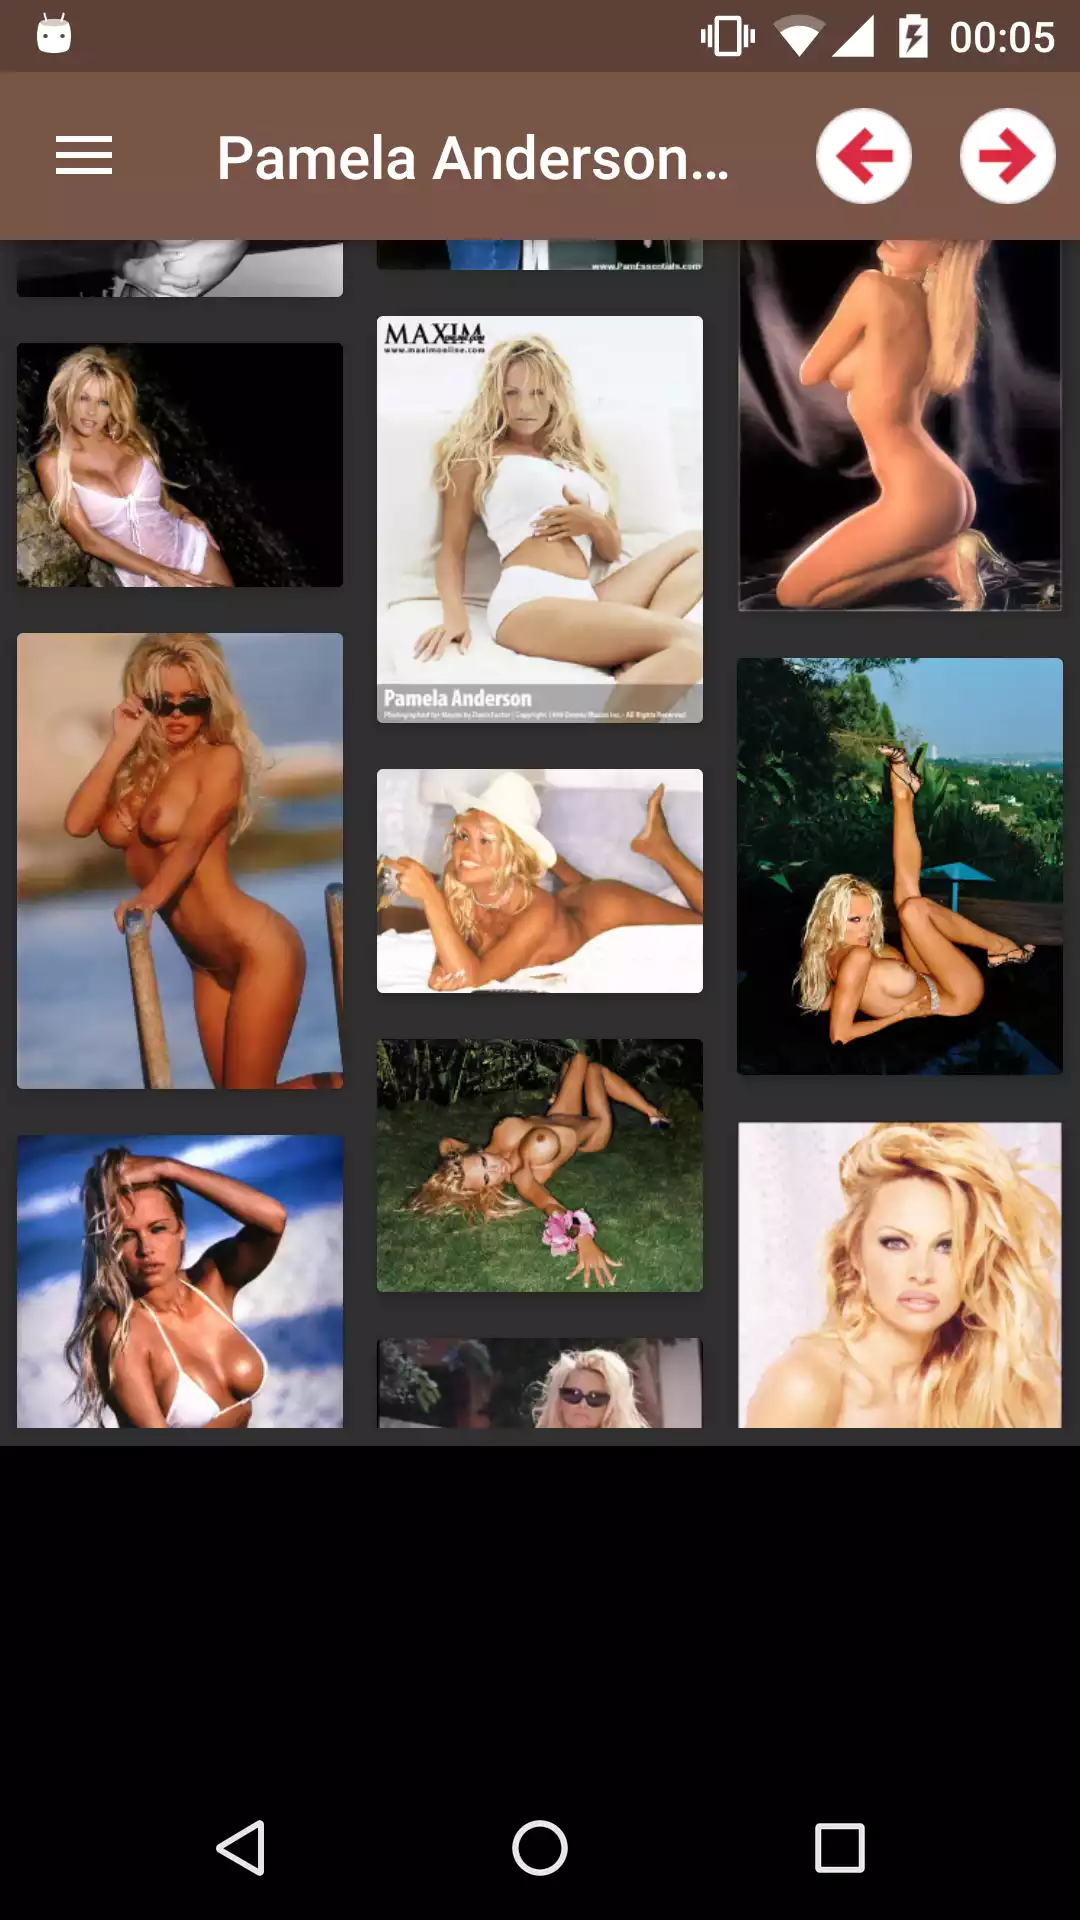 Pamela Anderson backgrounds images,download,daily,app,downloading,sexy,henati,image,hentai,apps,pictures,porn,pornstar,photos,offline,backgrounds,caprice,best,titties,anderson,adult,pamela,erotic,apk,android,lovely,anime,wallpapers